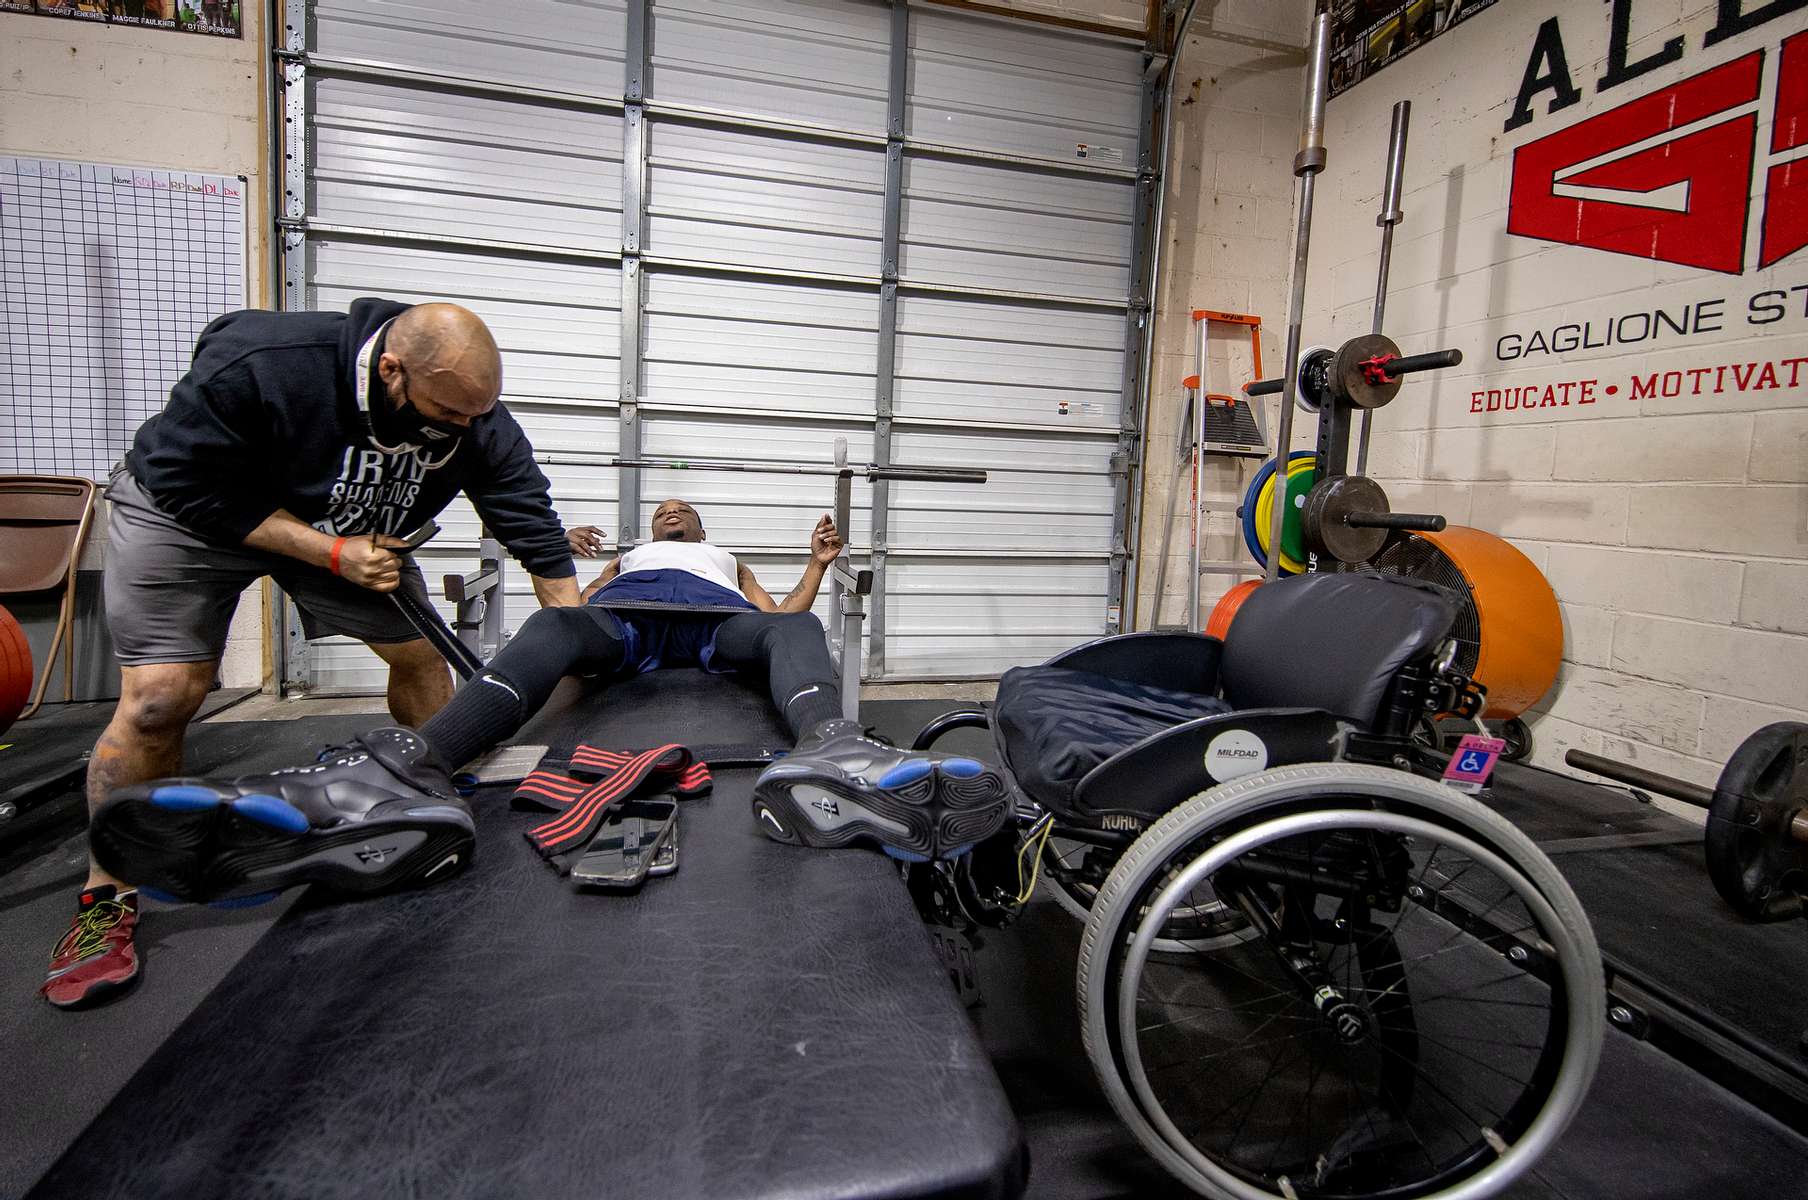 Team USA Para Powerlifter Garrison Redd has his legs strapped to the the bench to secure his legs by his Strength and conditioning coach John Gaglione.  Redd is preparing for a bench press training session at Gaglione Strength Gym on April 07, 2021 in Farmingdale, New York.